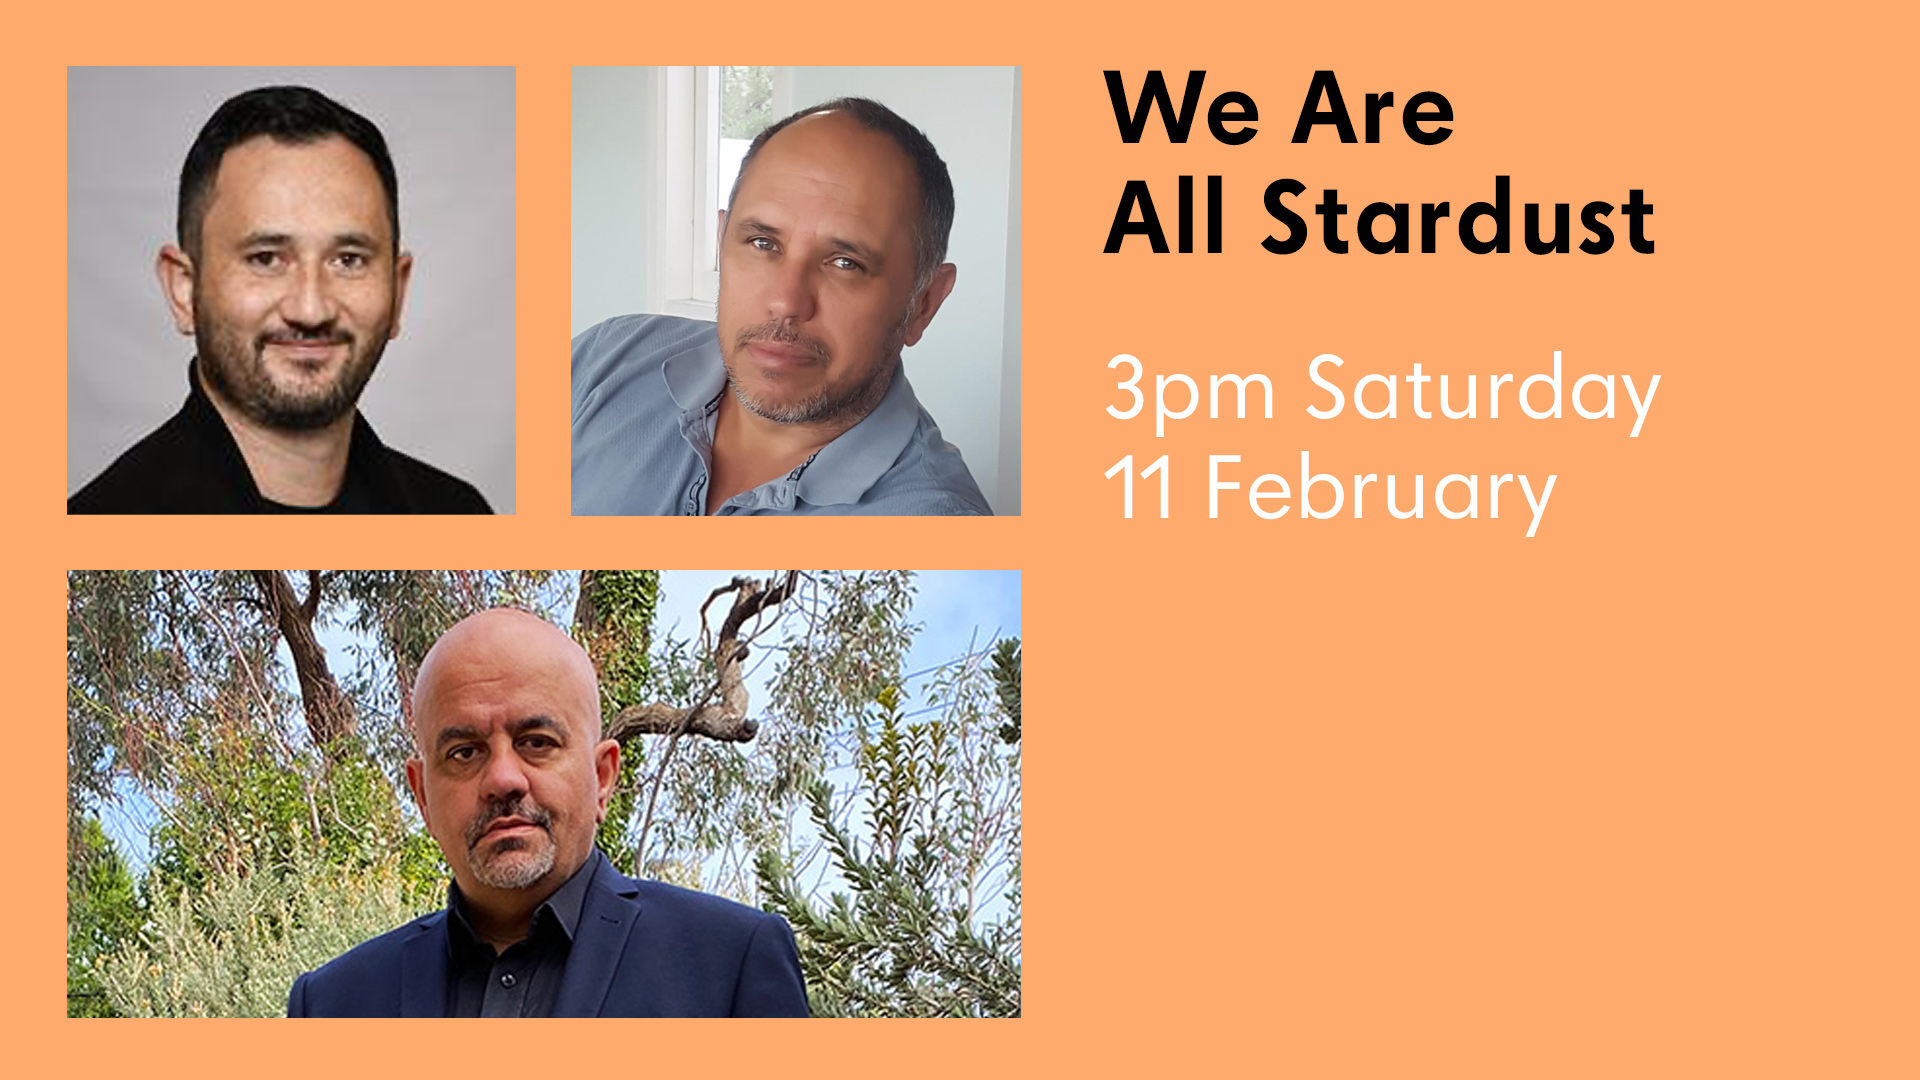 A poster for the We Are All Stardust event